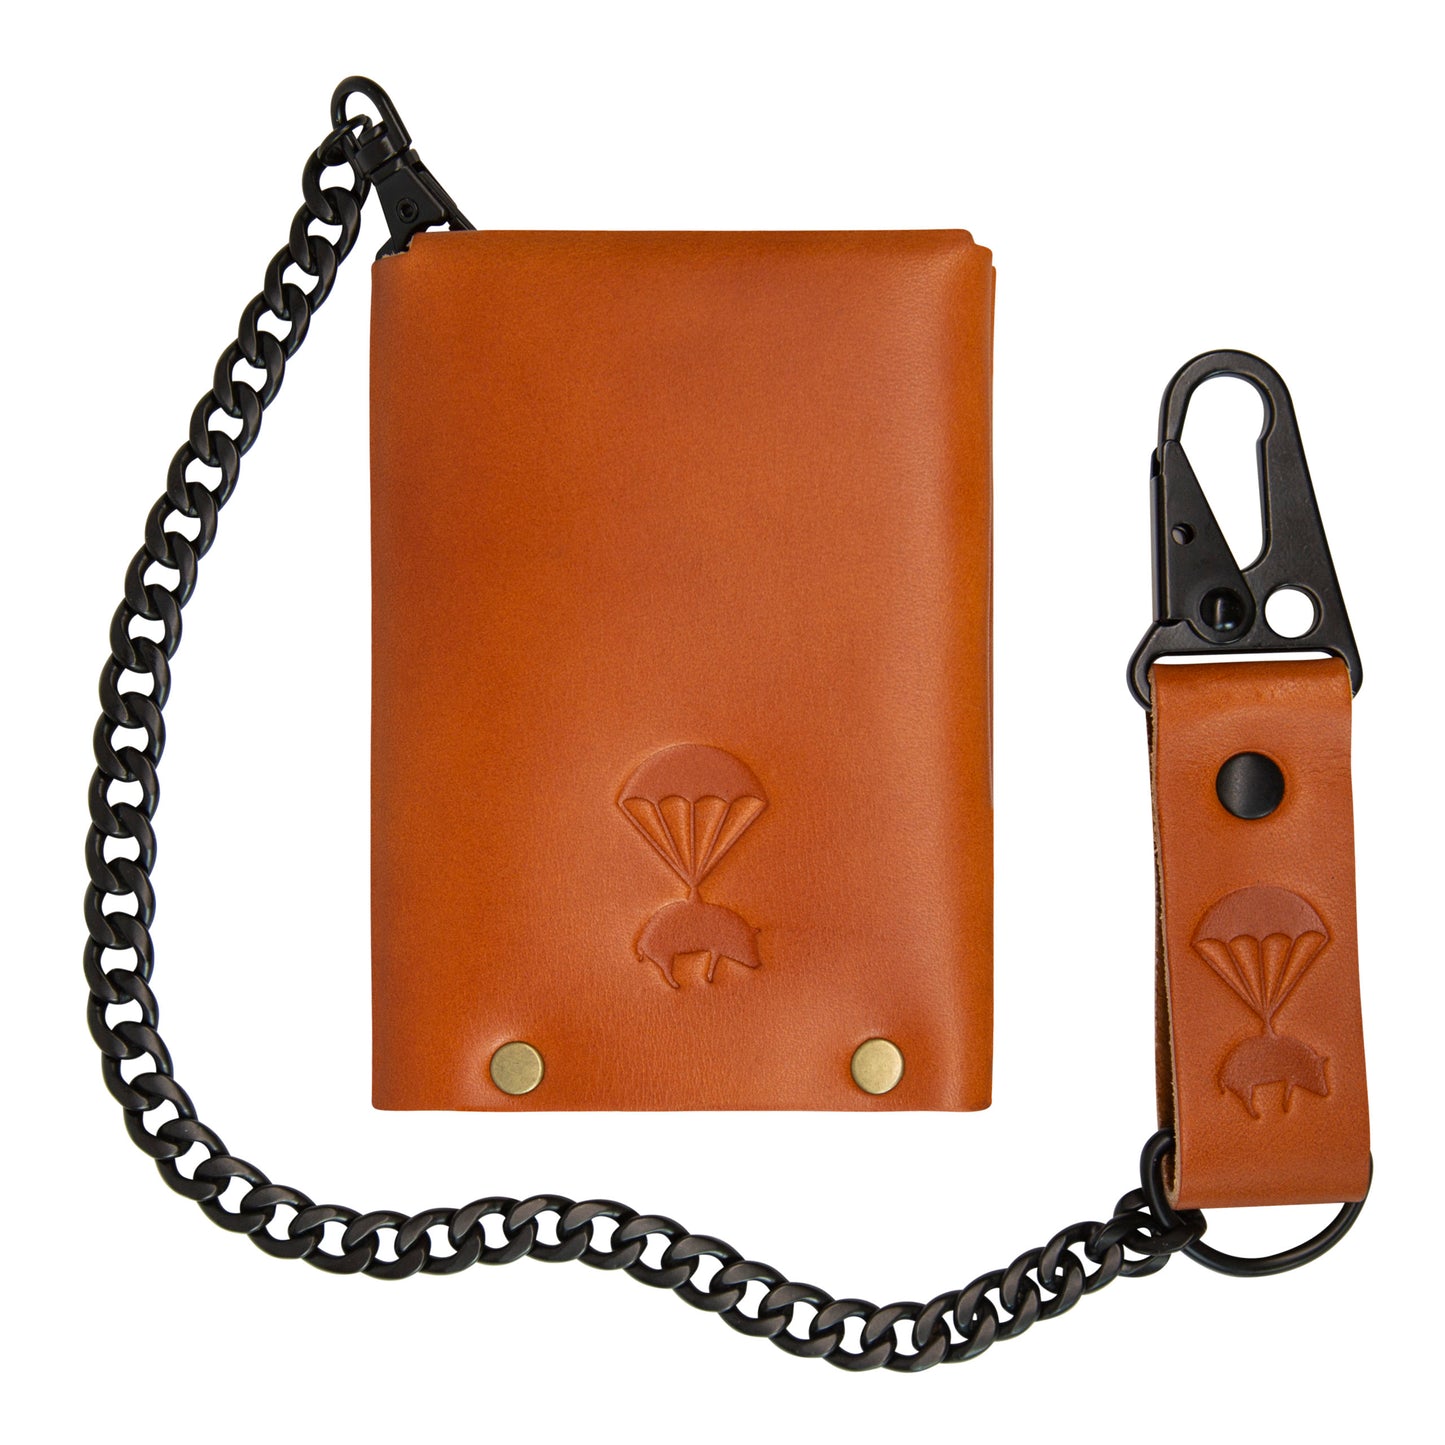 PIG Inc Wallet with Keychain - Saddle